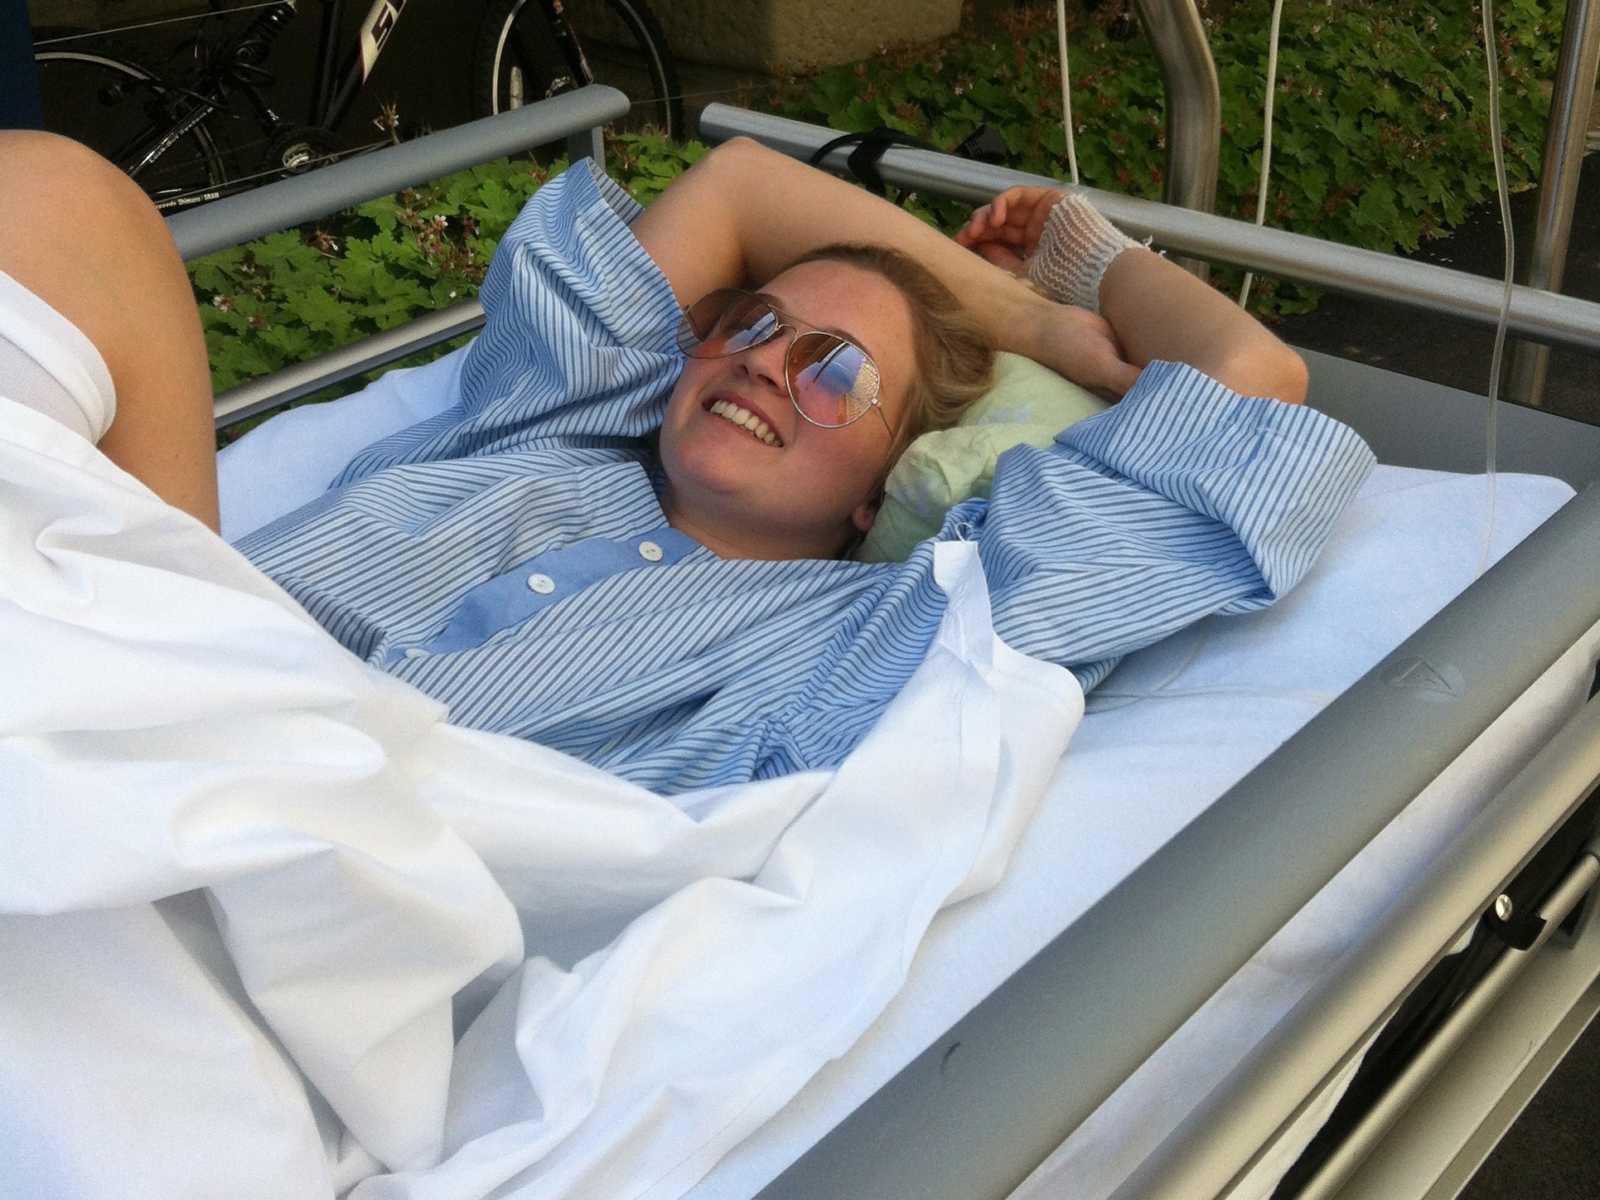 Woman with spine injury lying in hospital bed smiling